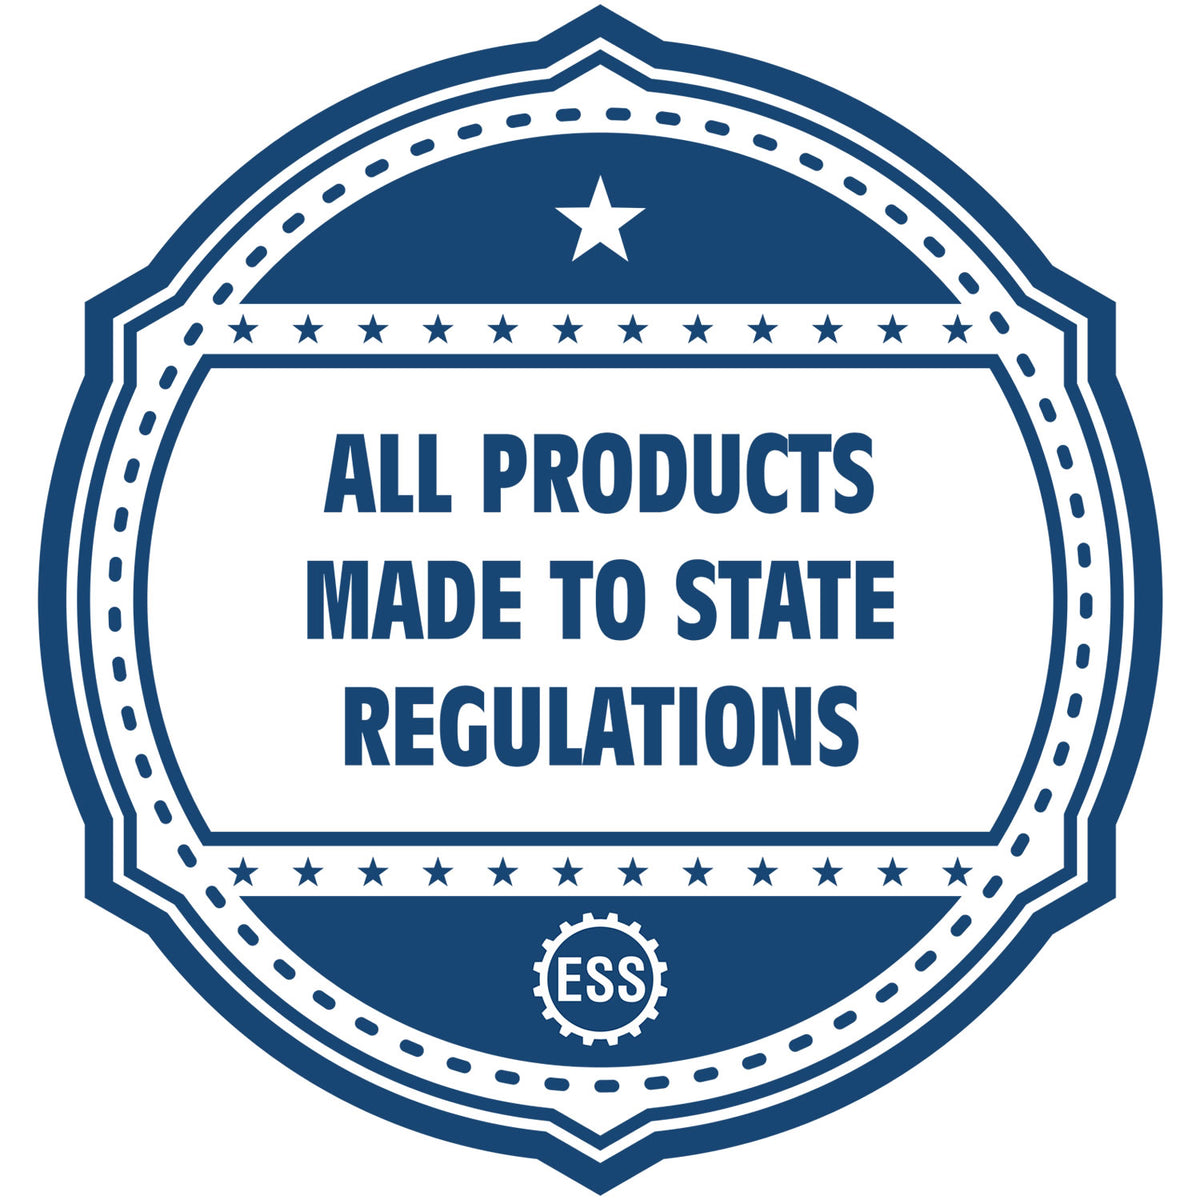 An icon or badge element for the Slim Pre-Inked District of Columbia Architect Seal Stamp showing that this product is made in compliance with state regulations.